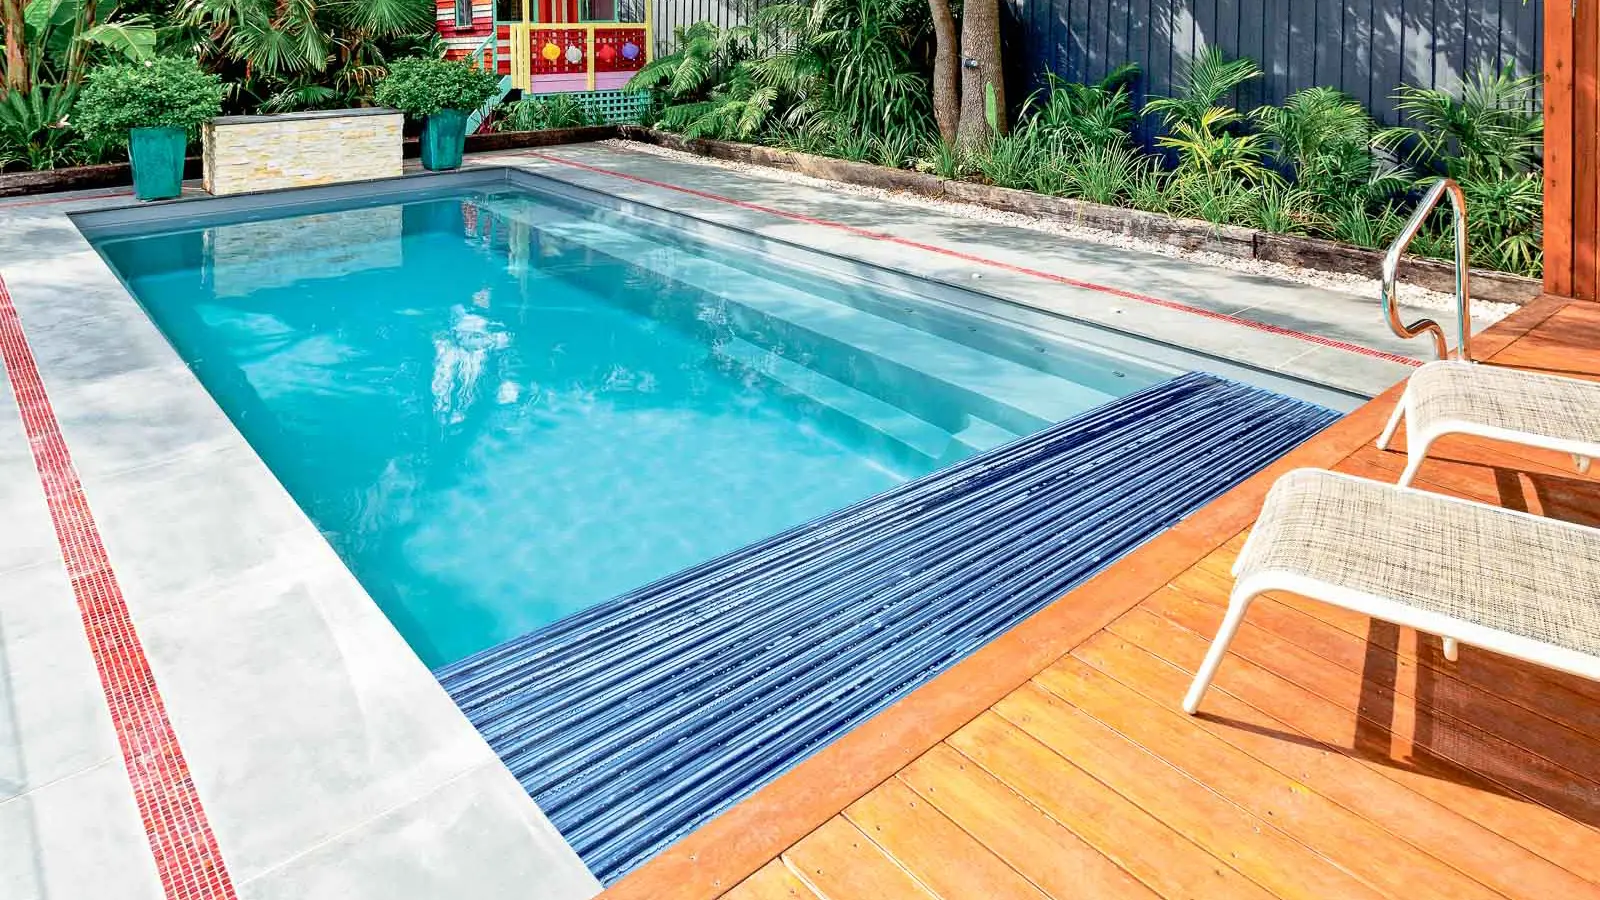 The Reflection with Cover, a fiberglass pool with full-length bench seating and built-in cover box